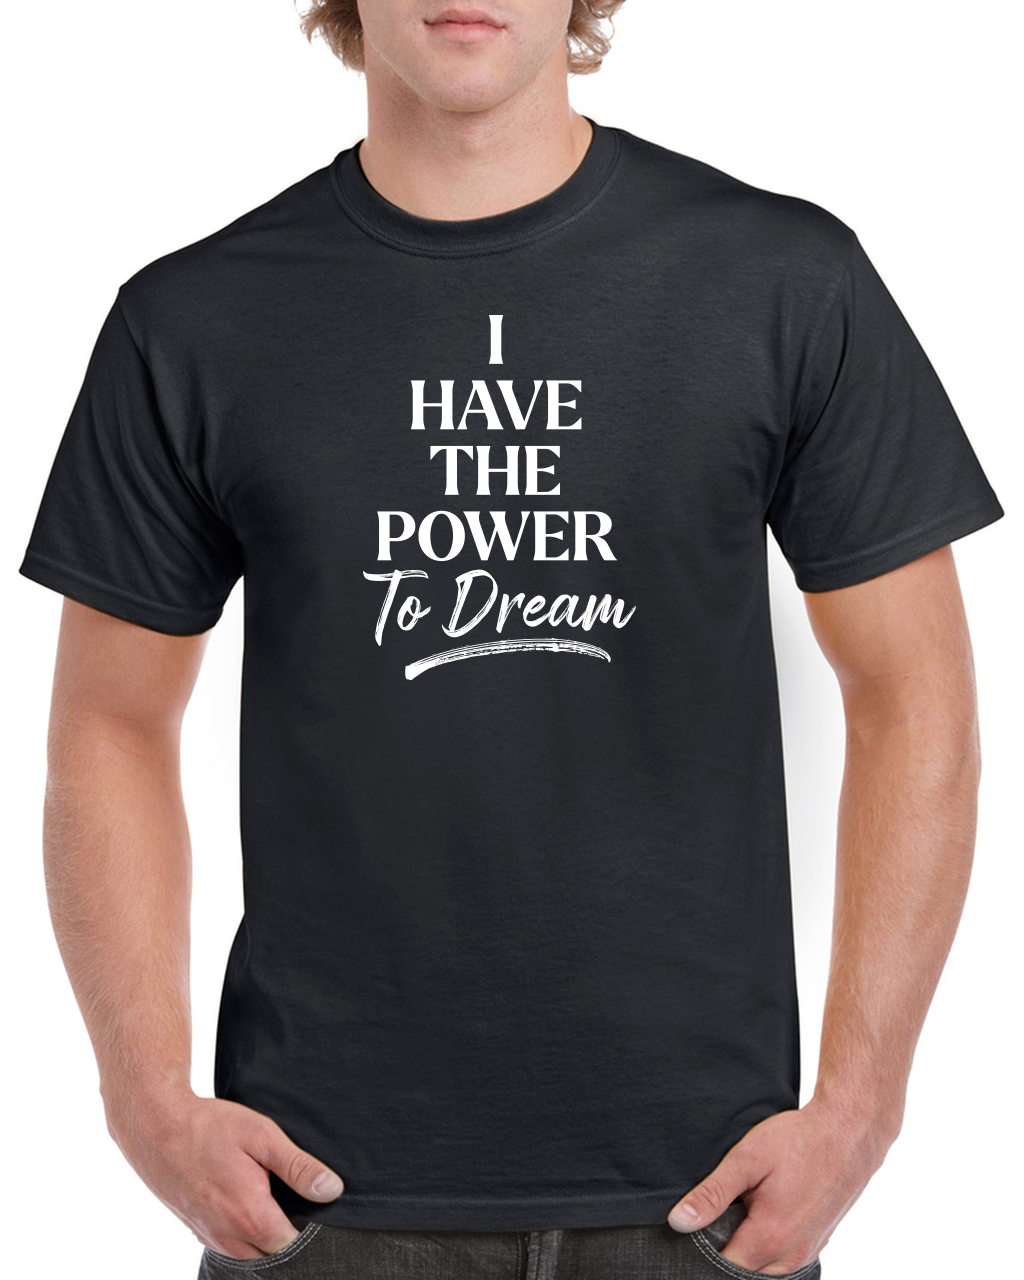 I have the power to DREAM Men's T-shirt